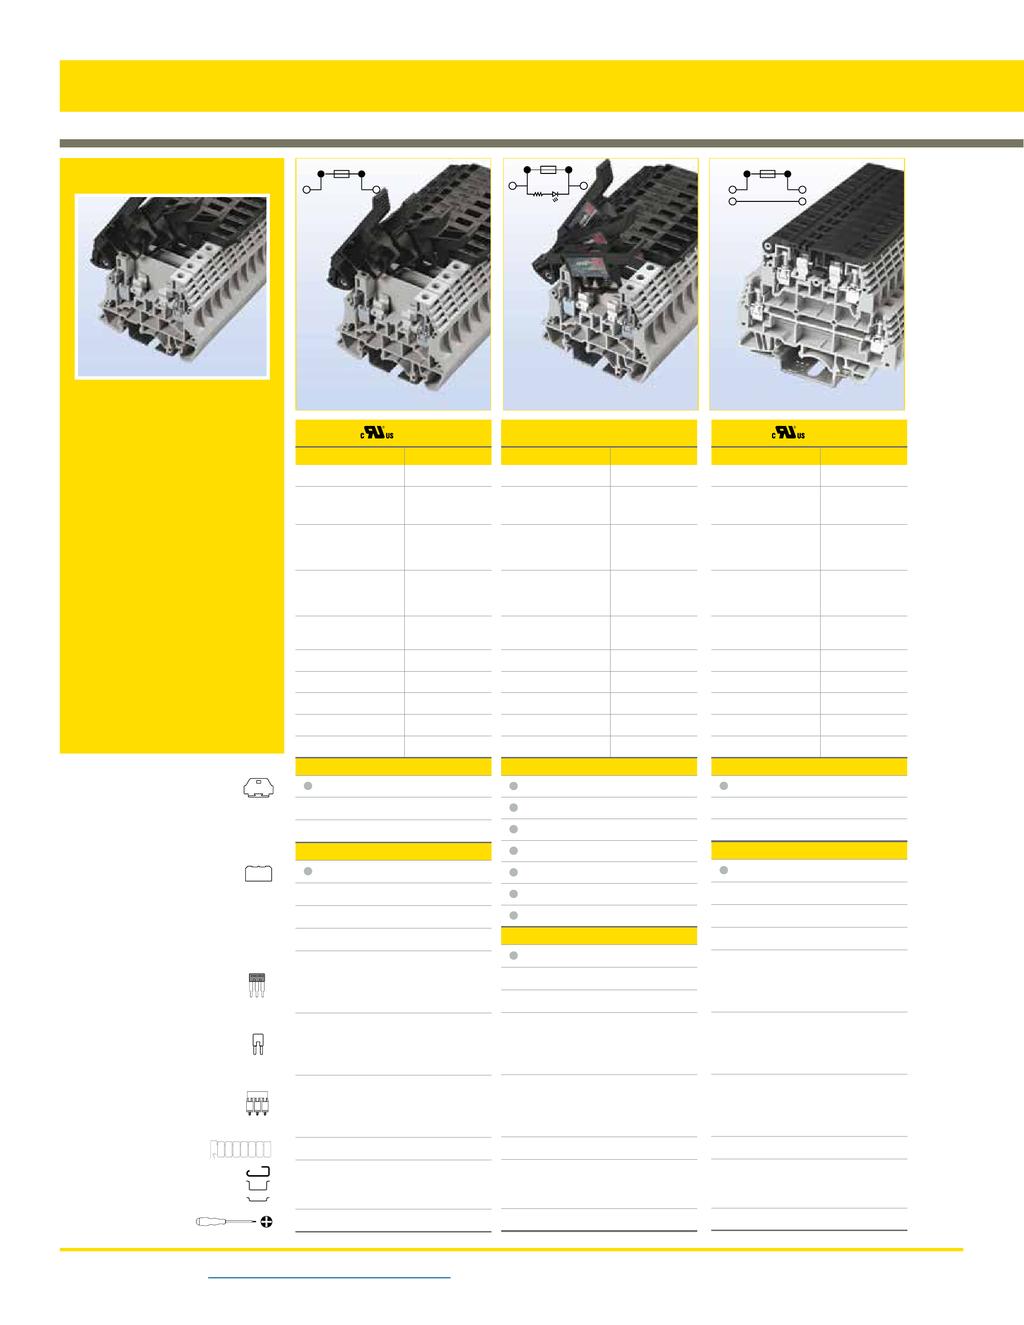 Fuse Holder Blocks F520 Series Fuse terminal blocks protect your sensors and relays. Available in lever and screw-cap style, with and without LED indication.